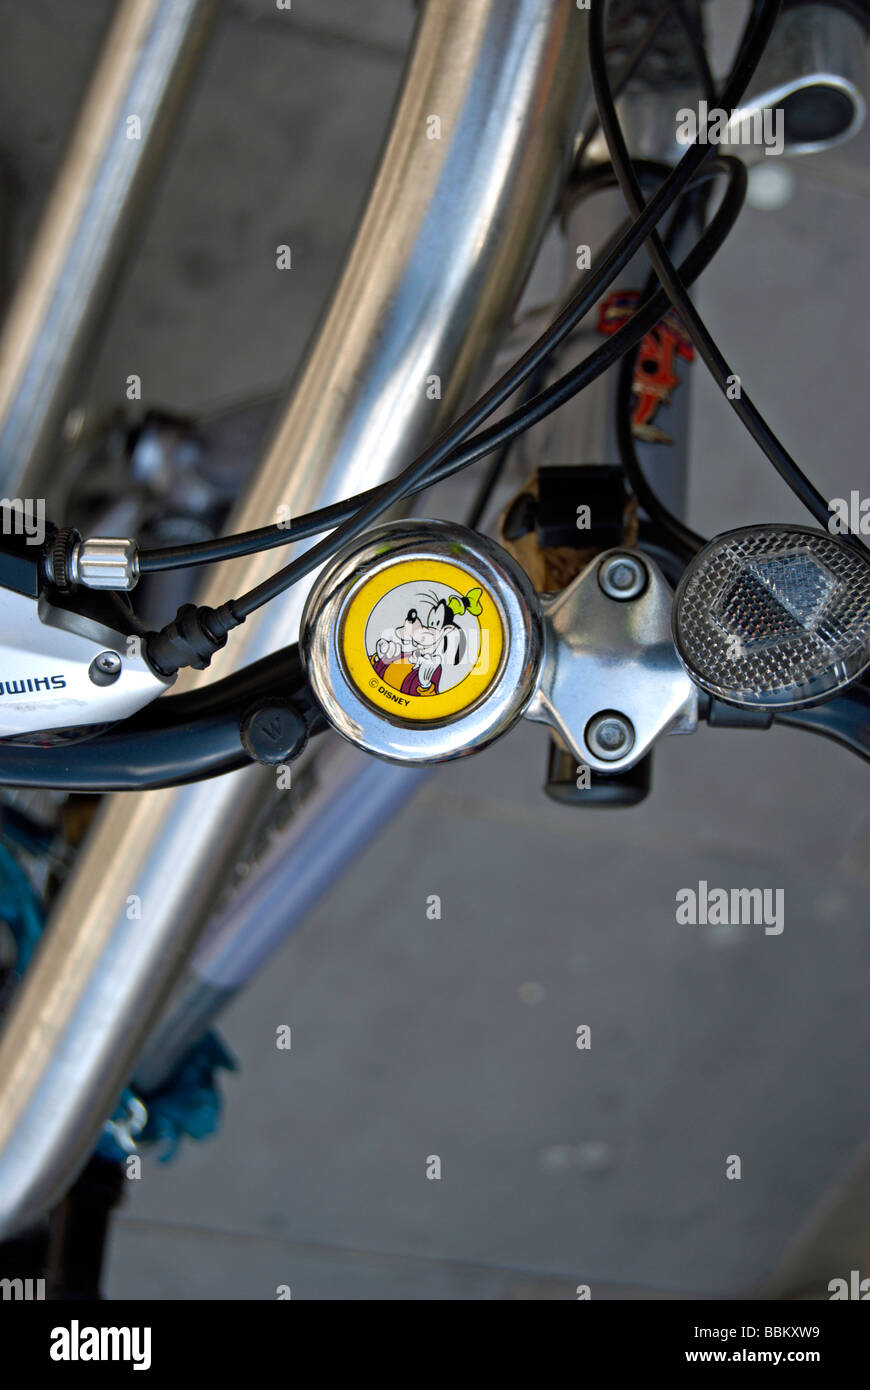 image of the disney character goofy on a bike bell,  in hammersmith, west london, england Stock Photo